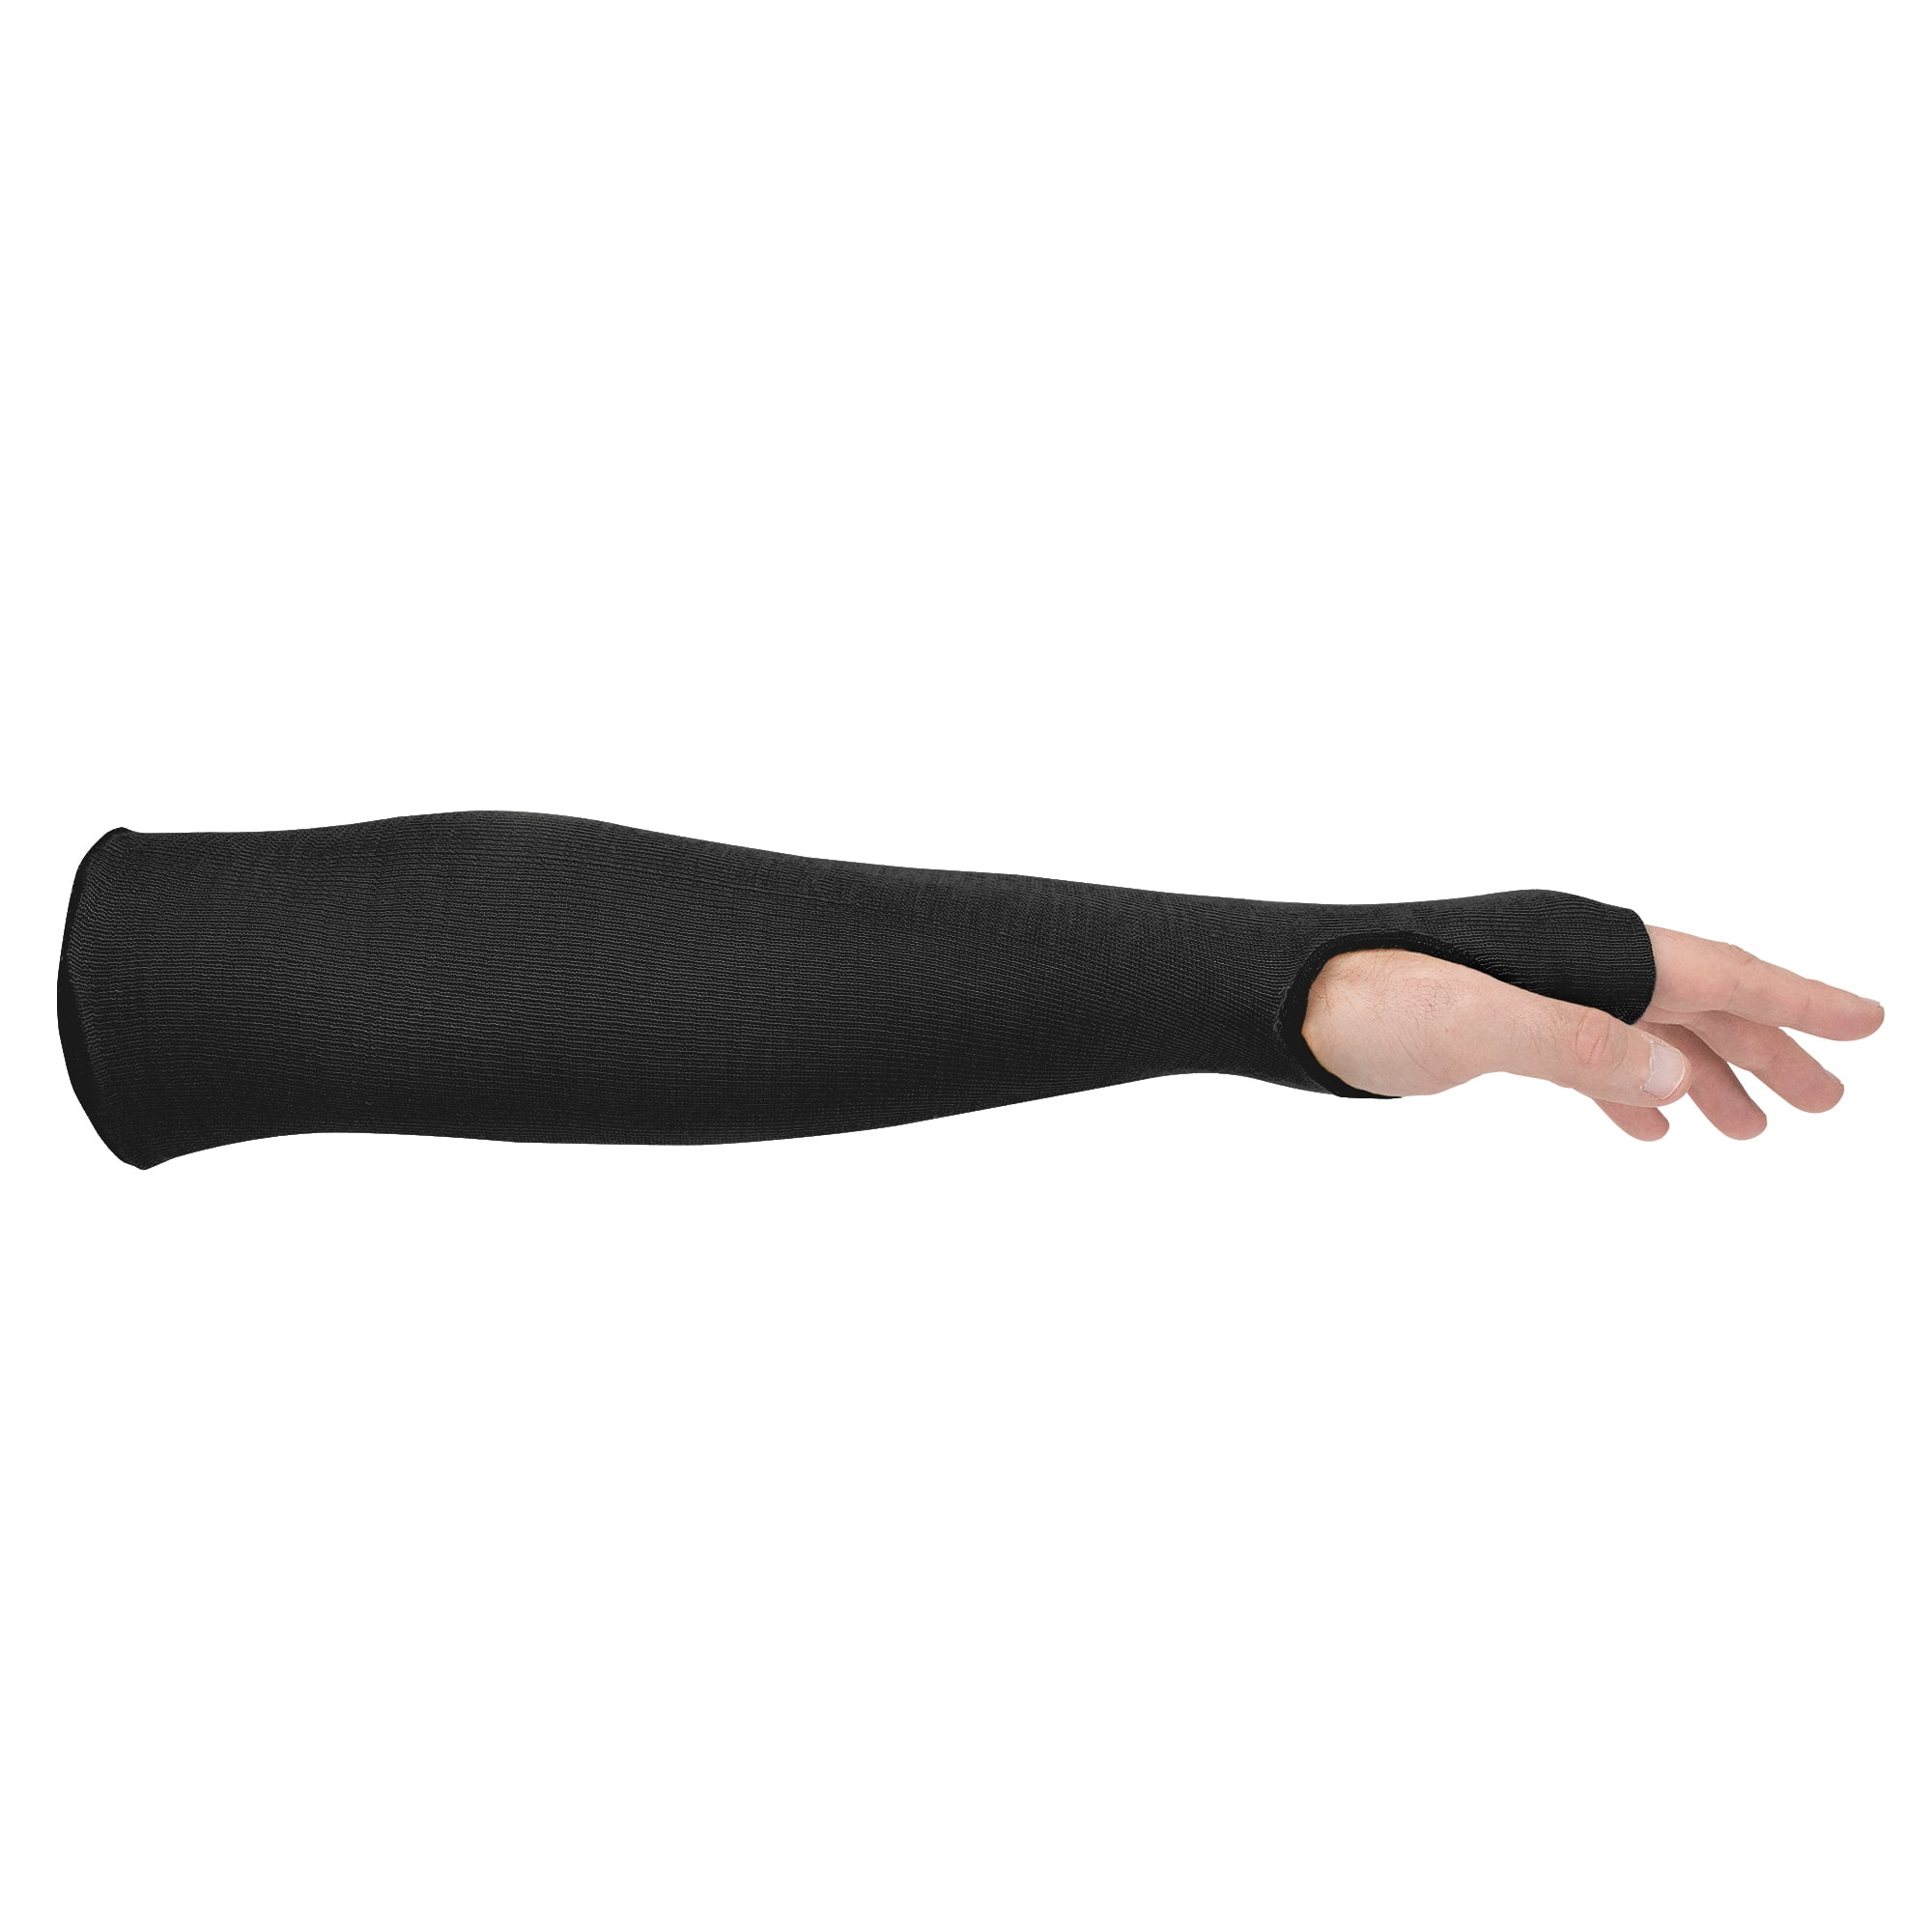 Cut/Scratch/Heat/Slash Resistant Arm Sleeves-18" Made with 100% DuPont™ Kevlar® 